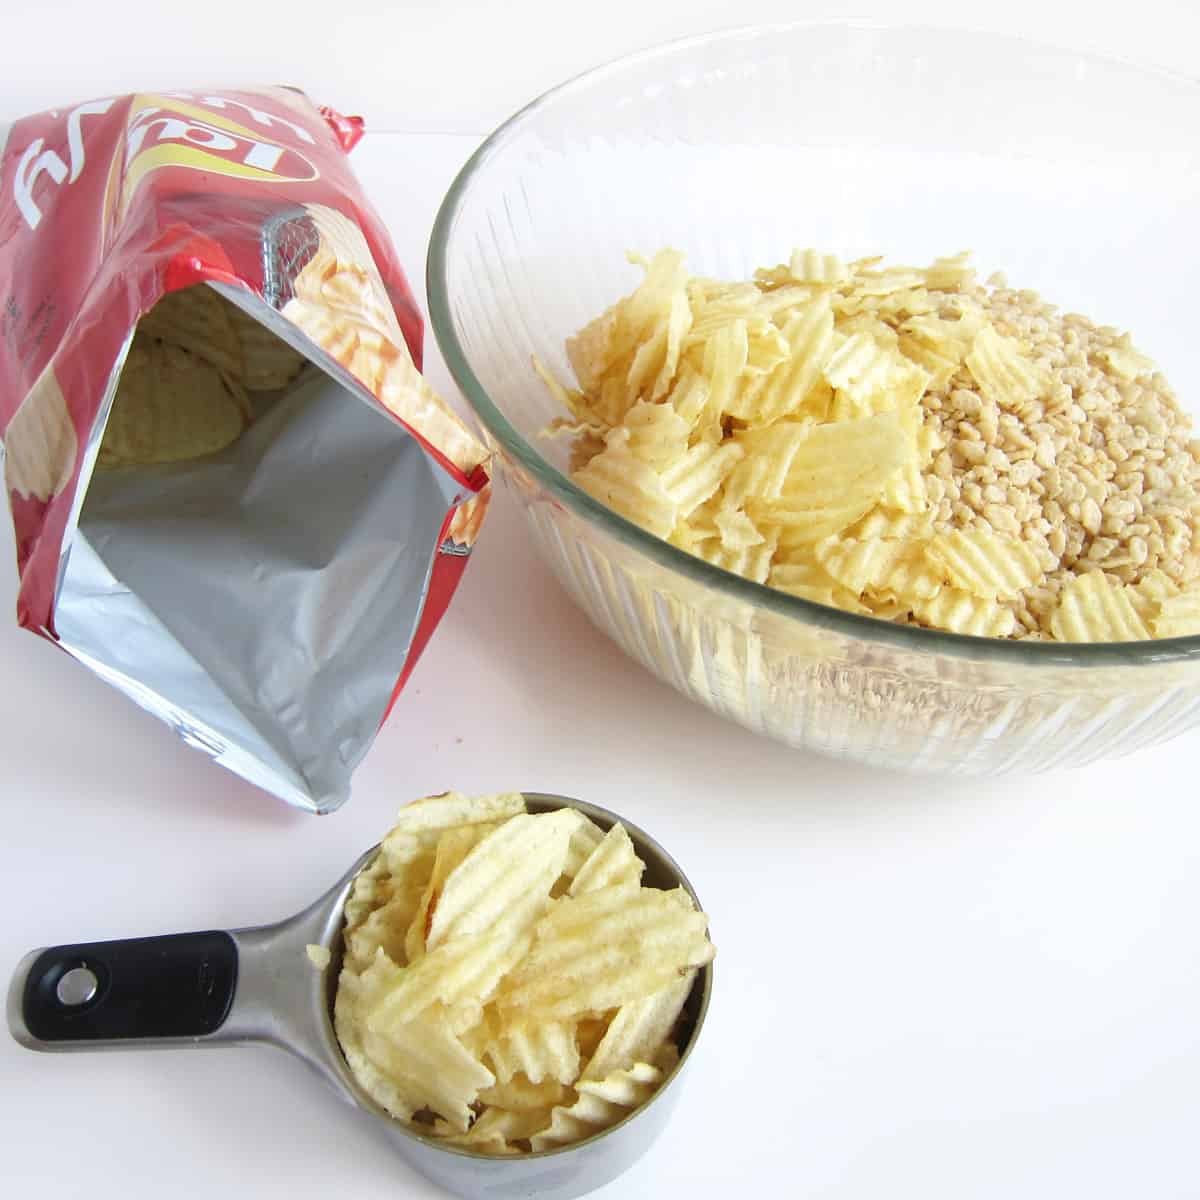 a bag of rippled potato chips set next to a large mixing bowl filled with chips and Rice Krispies cereal.